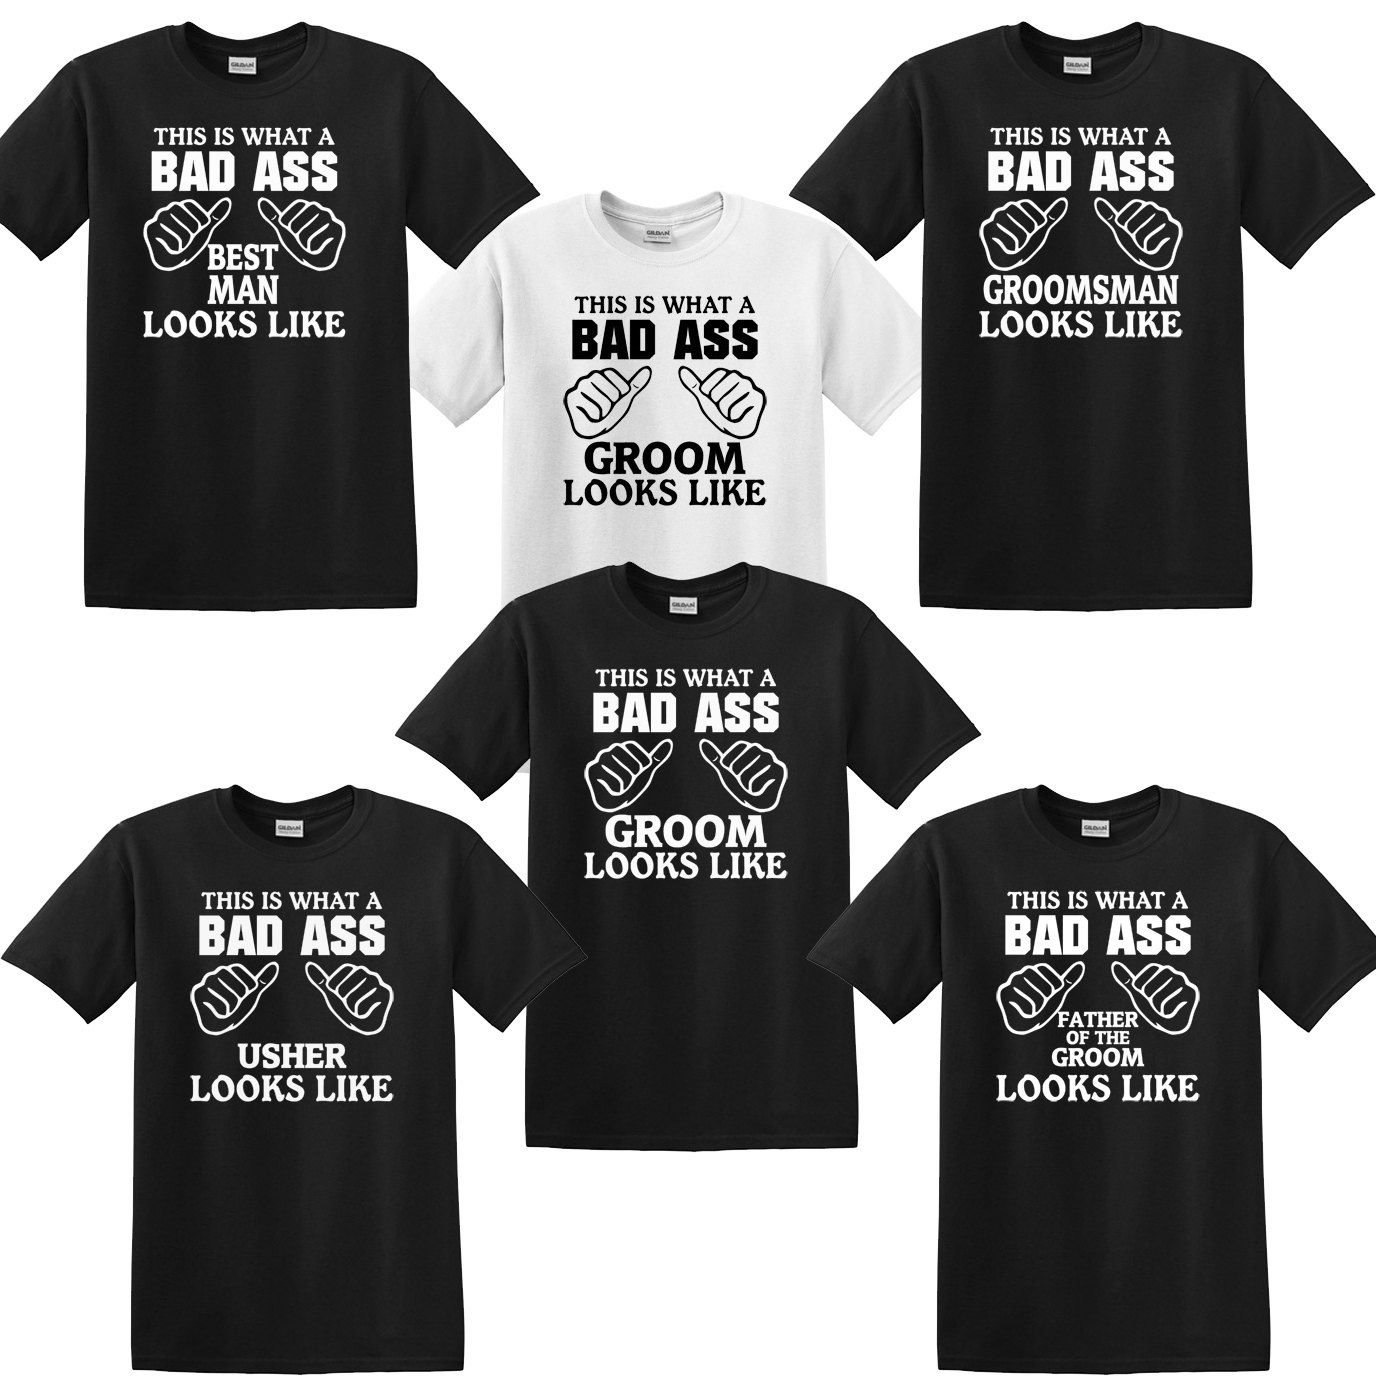 10 Ideal Bachelor Party T Shirt Ideas bad ass bachelor and wedding party t shirts for groom groomsmen 2022